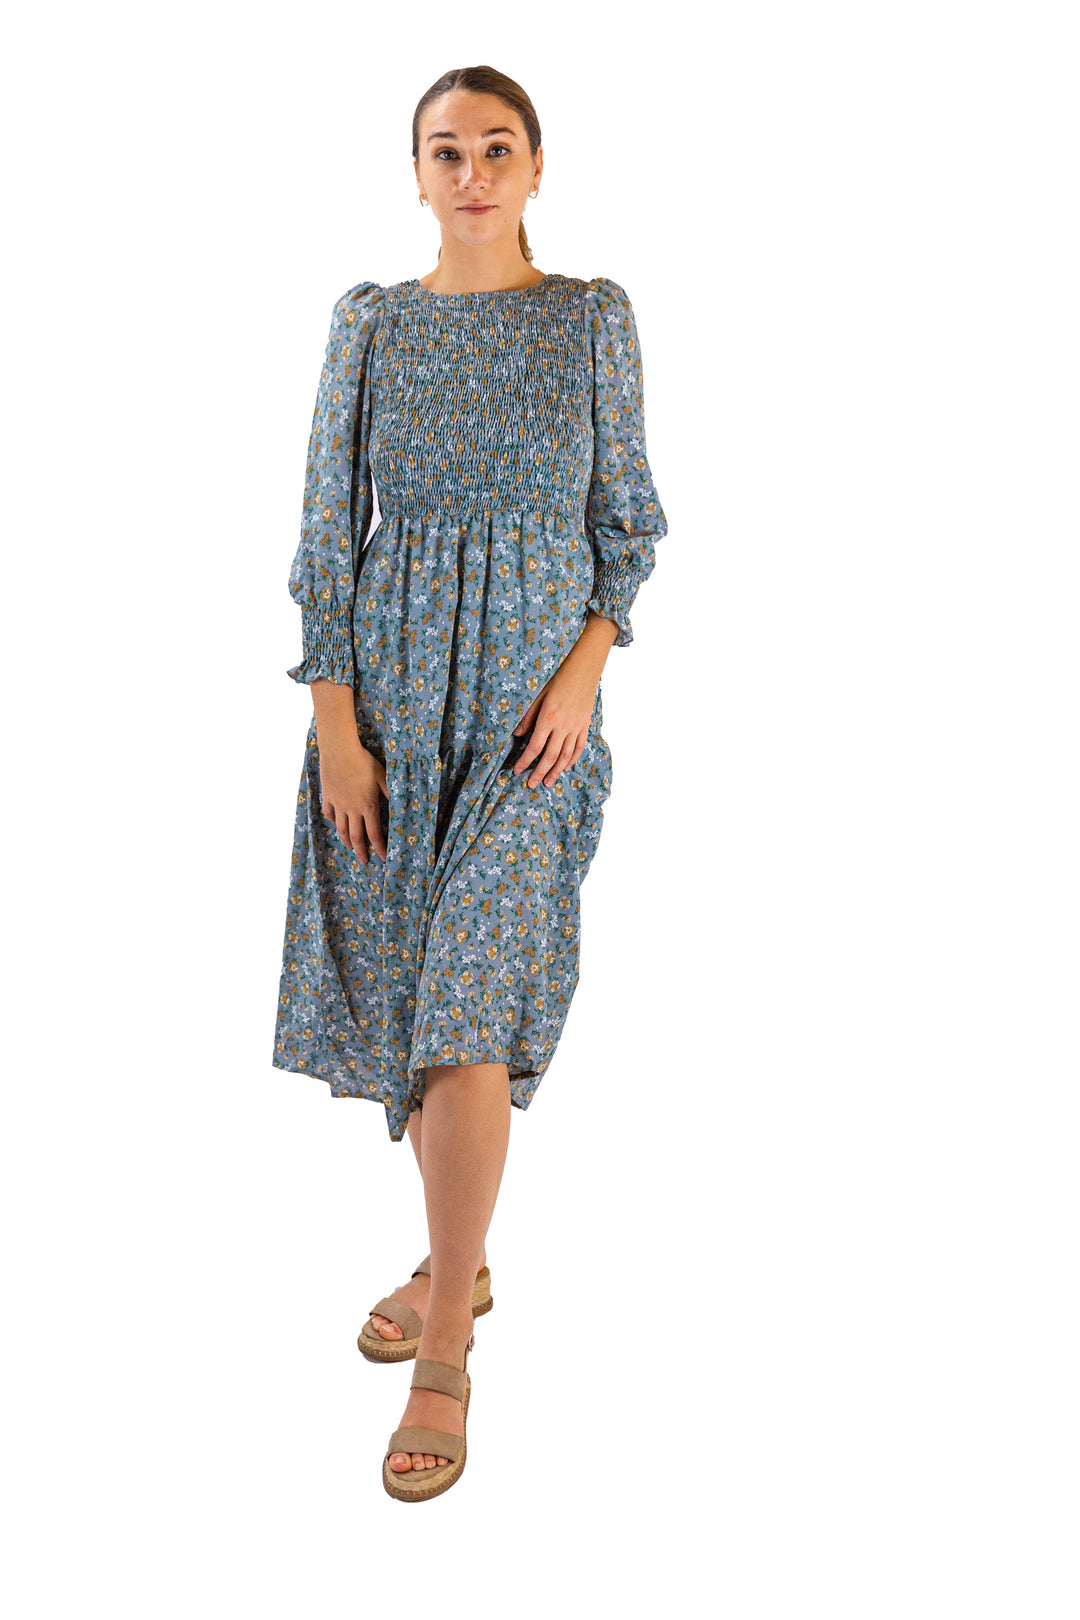 Enchanted Garden Blue Floral Midi Dress with Three-Quarter Sleeves